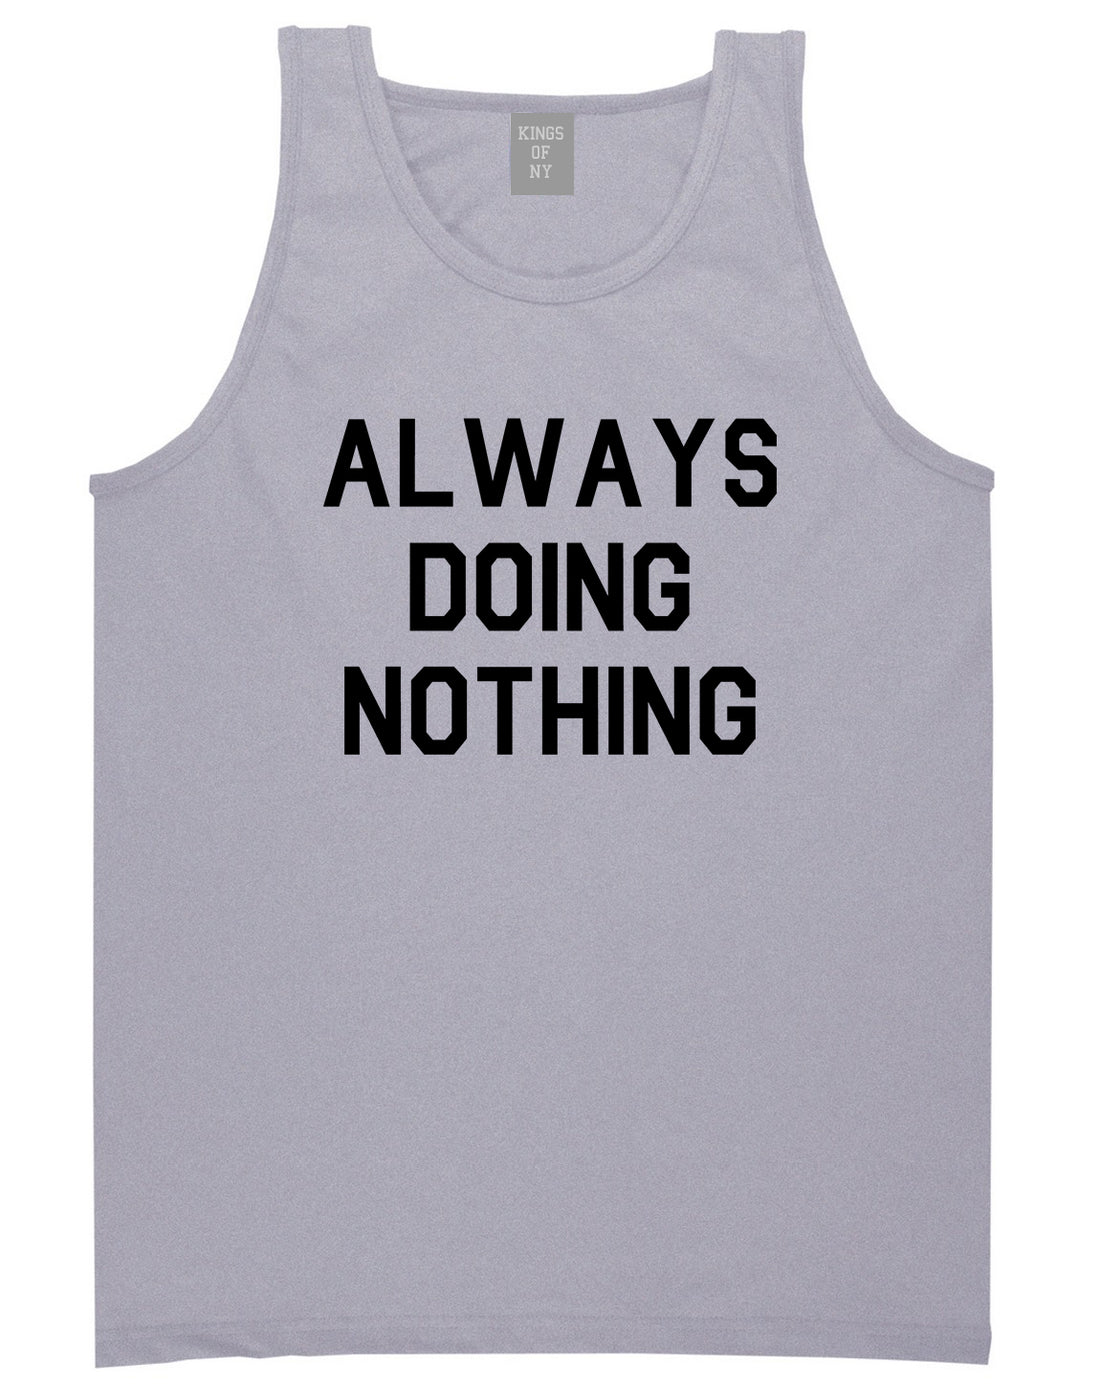 Always_Doing_Nothing Mens Grey Tank Top Shirt by Kings Of NY